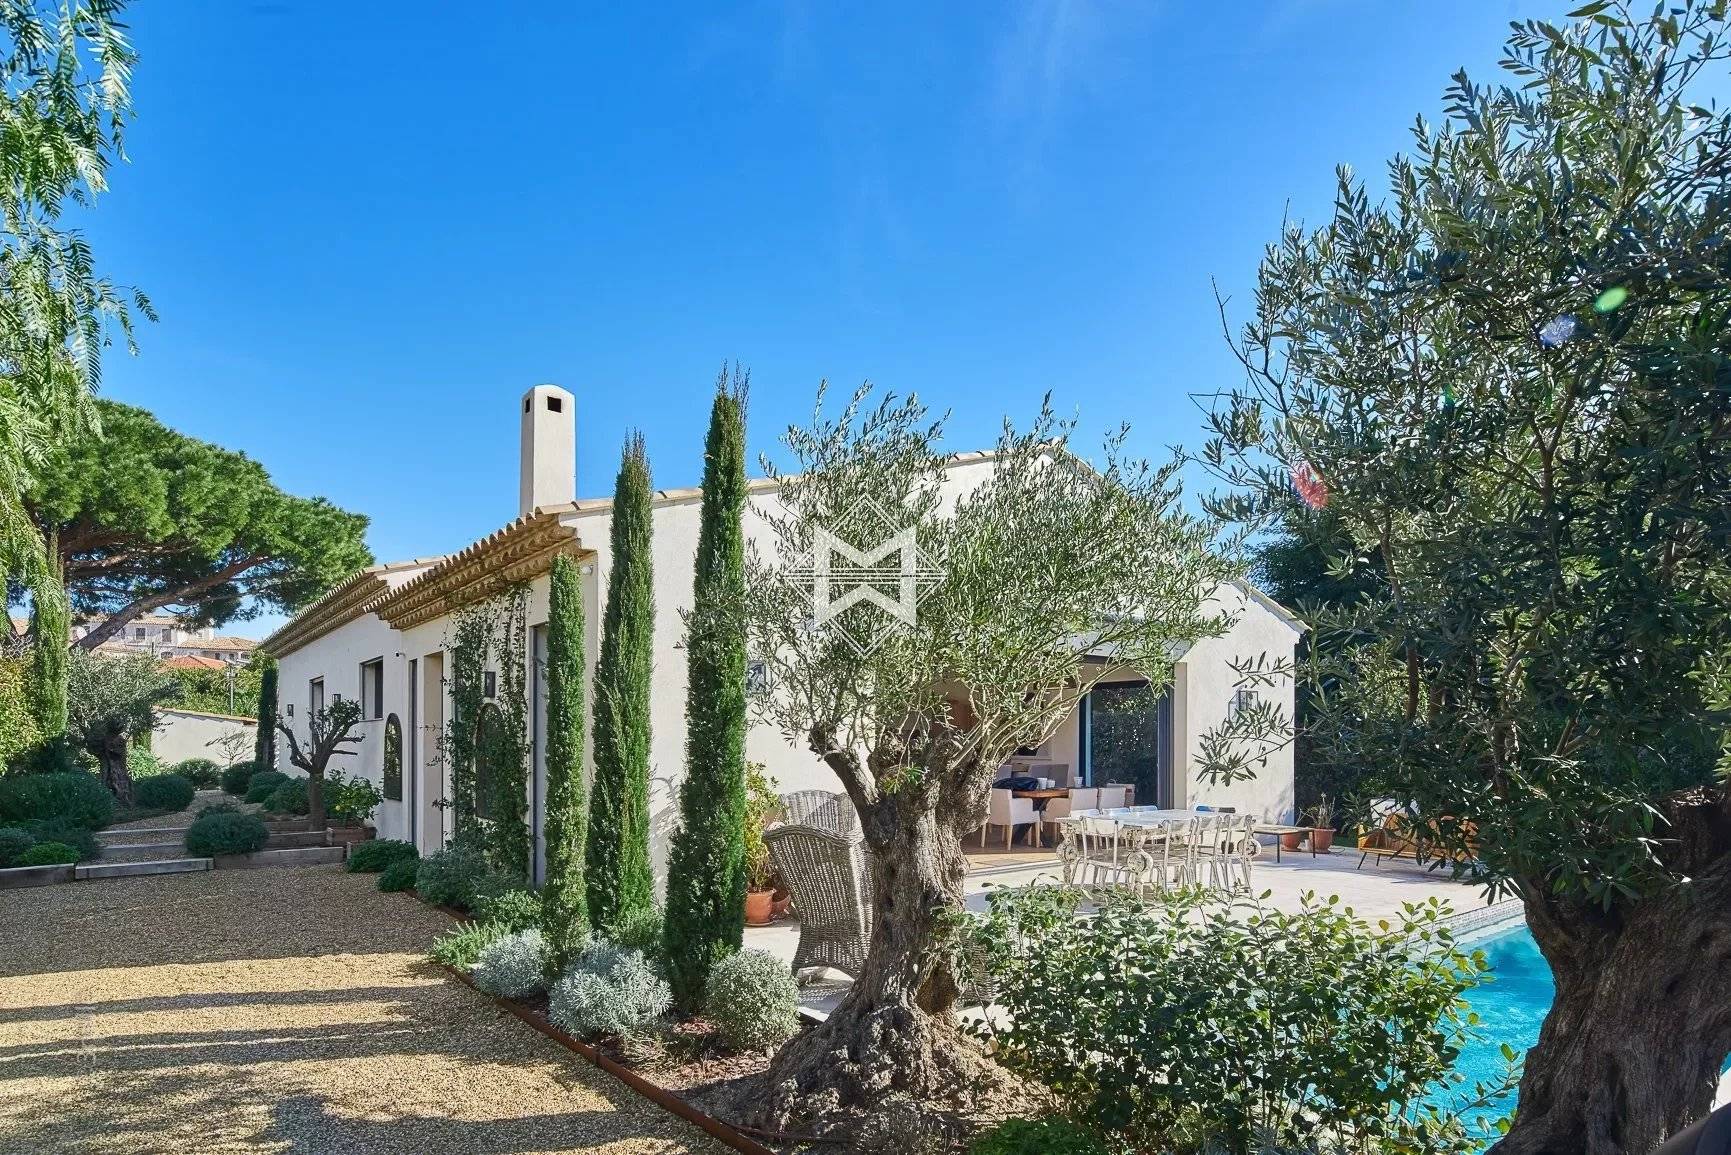 Recently renovated villa with swimming pool in the heart of Saint-Tropez